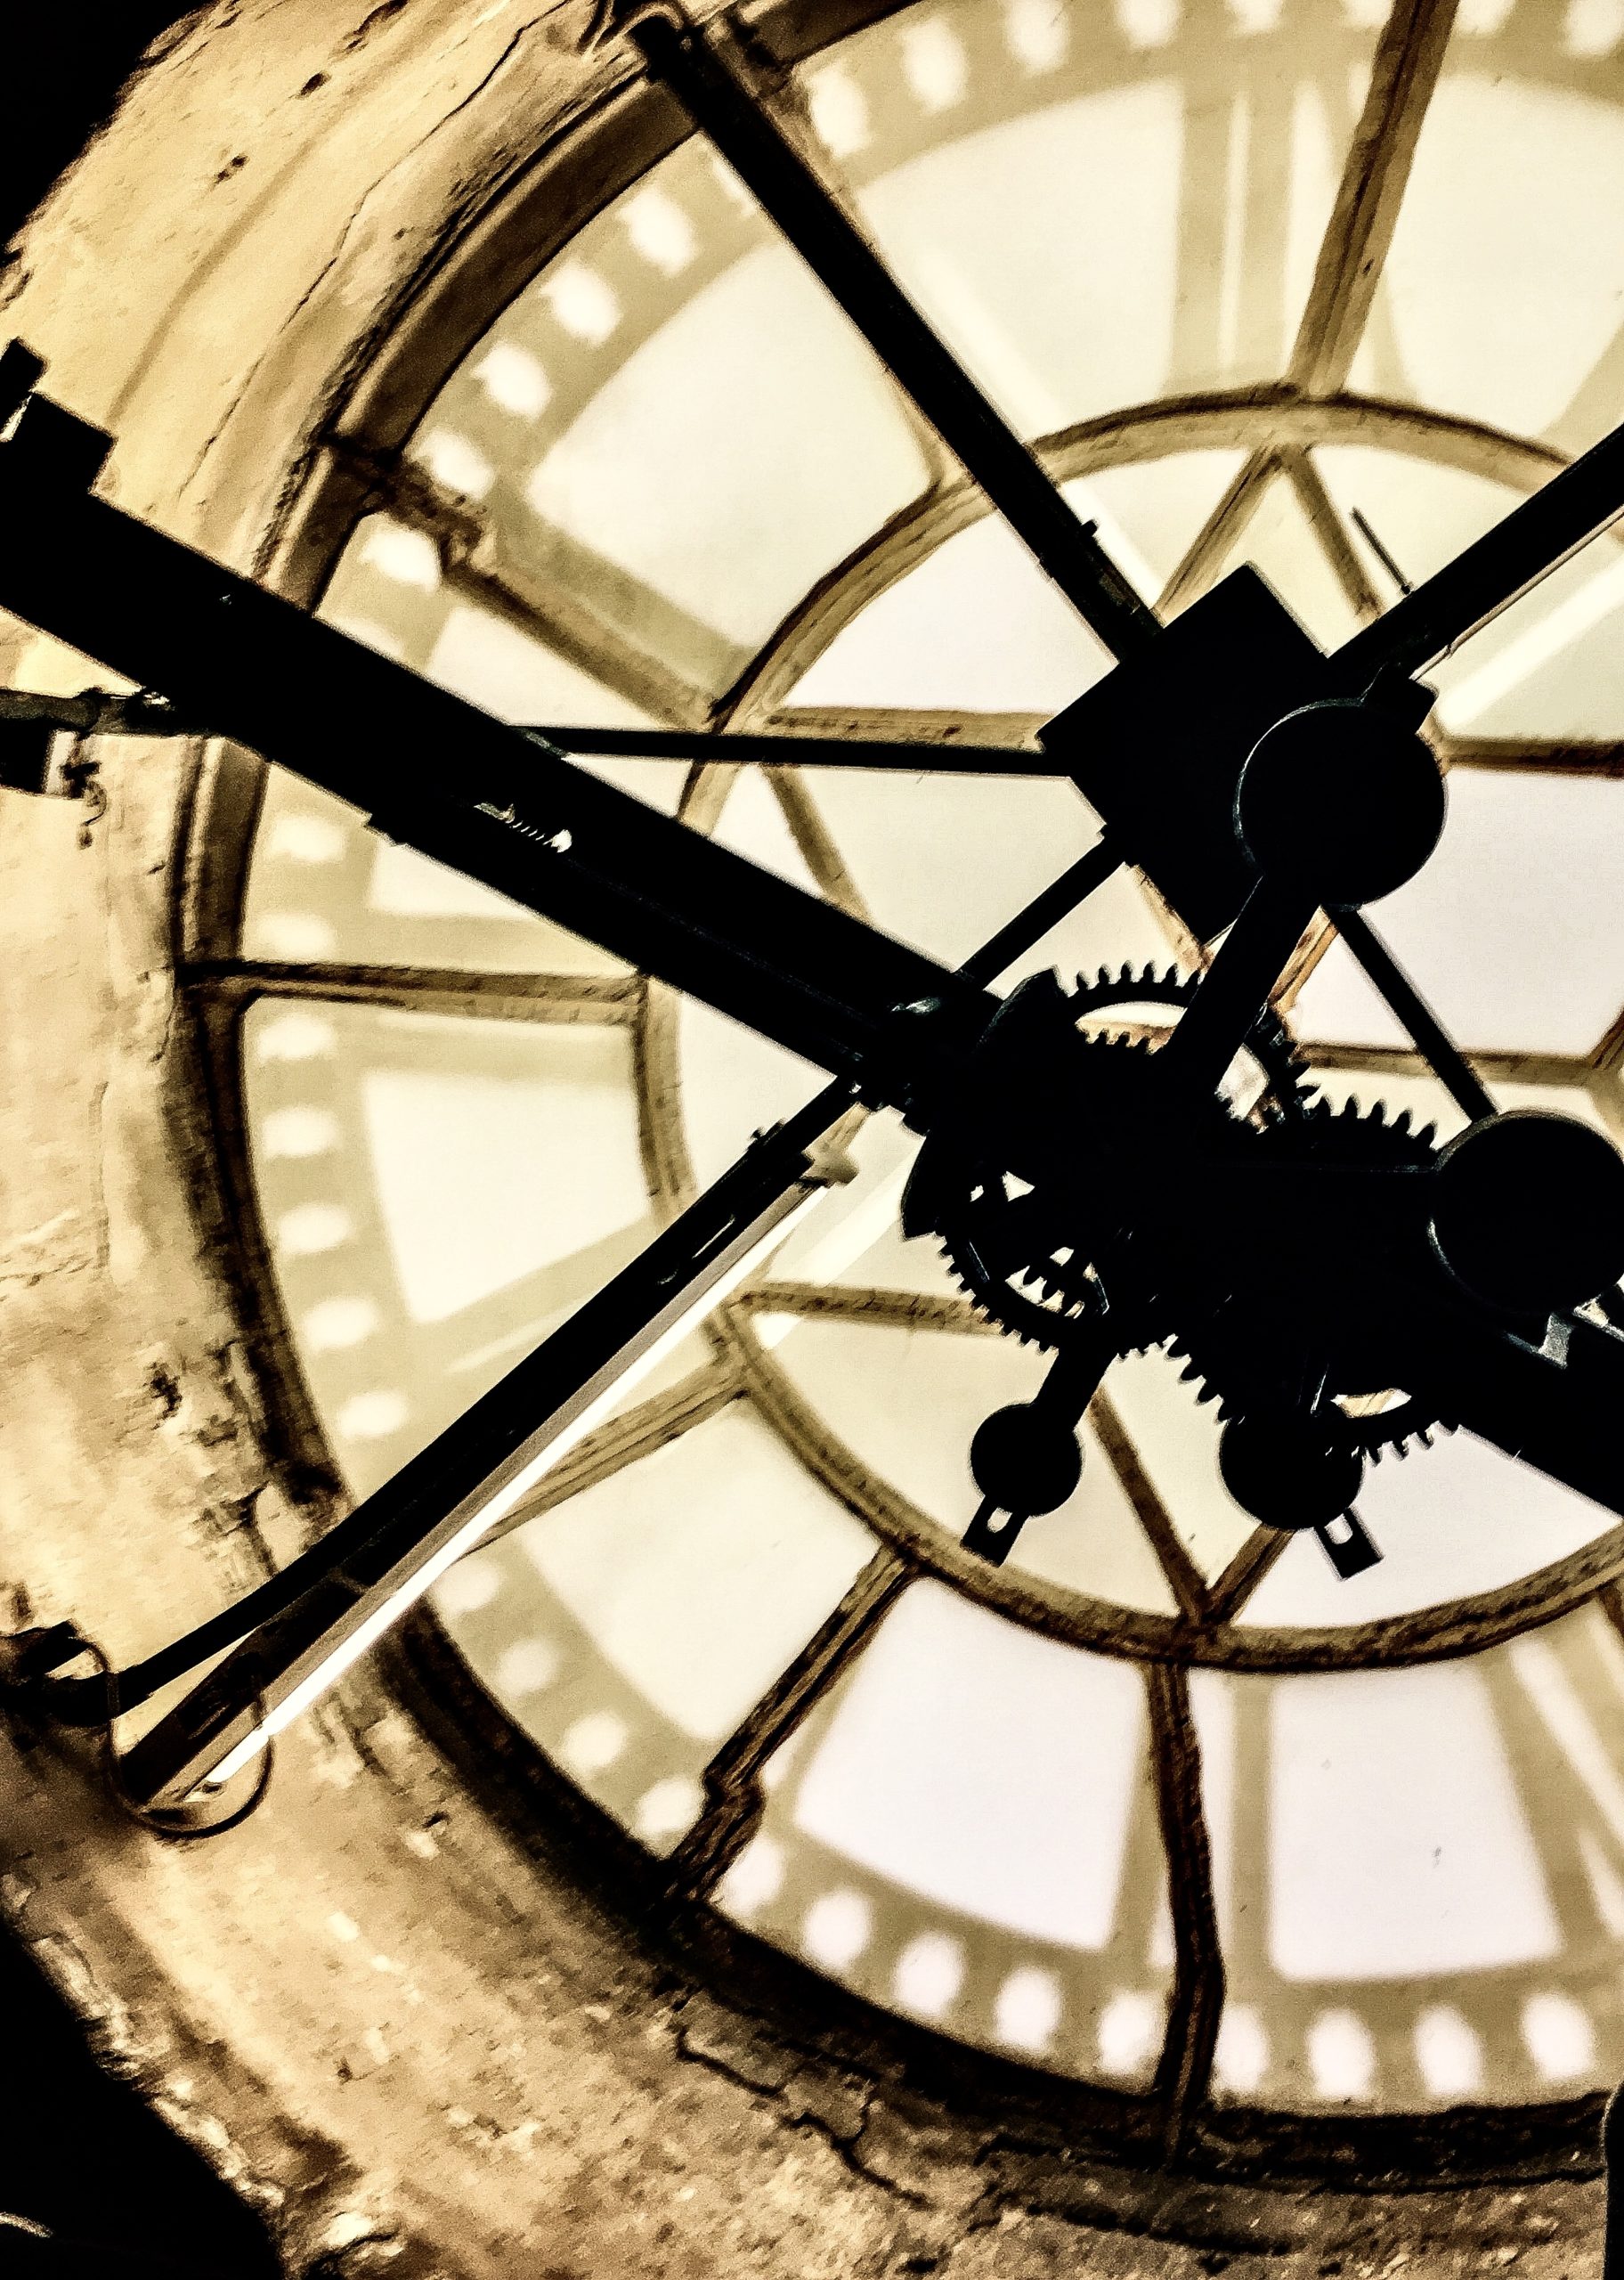 The picture shows time ticking away on the inner side of the Cathedral at Bath, England.